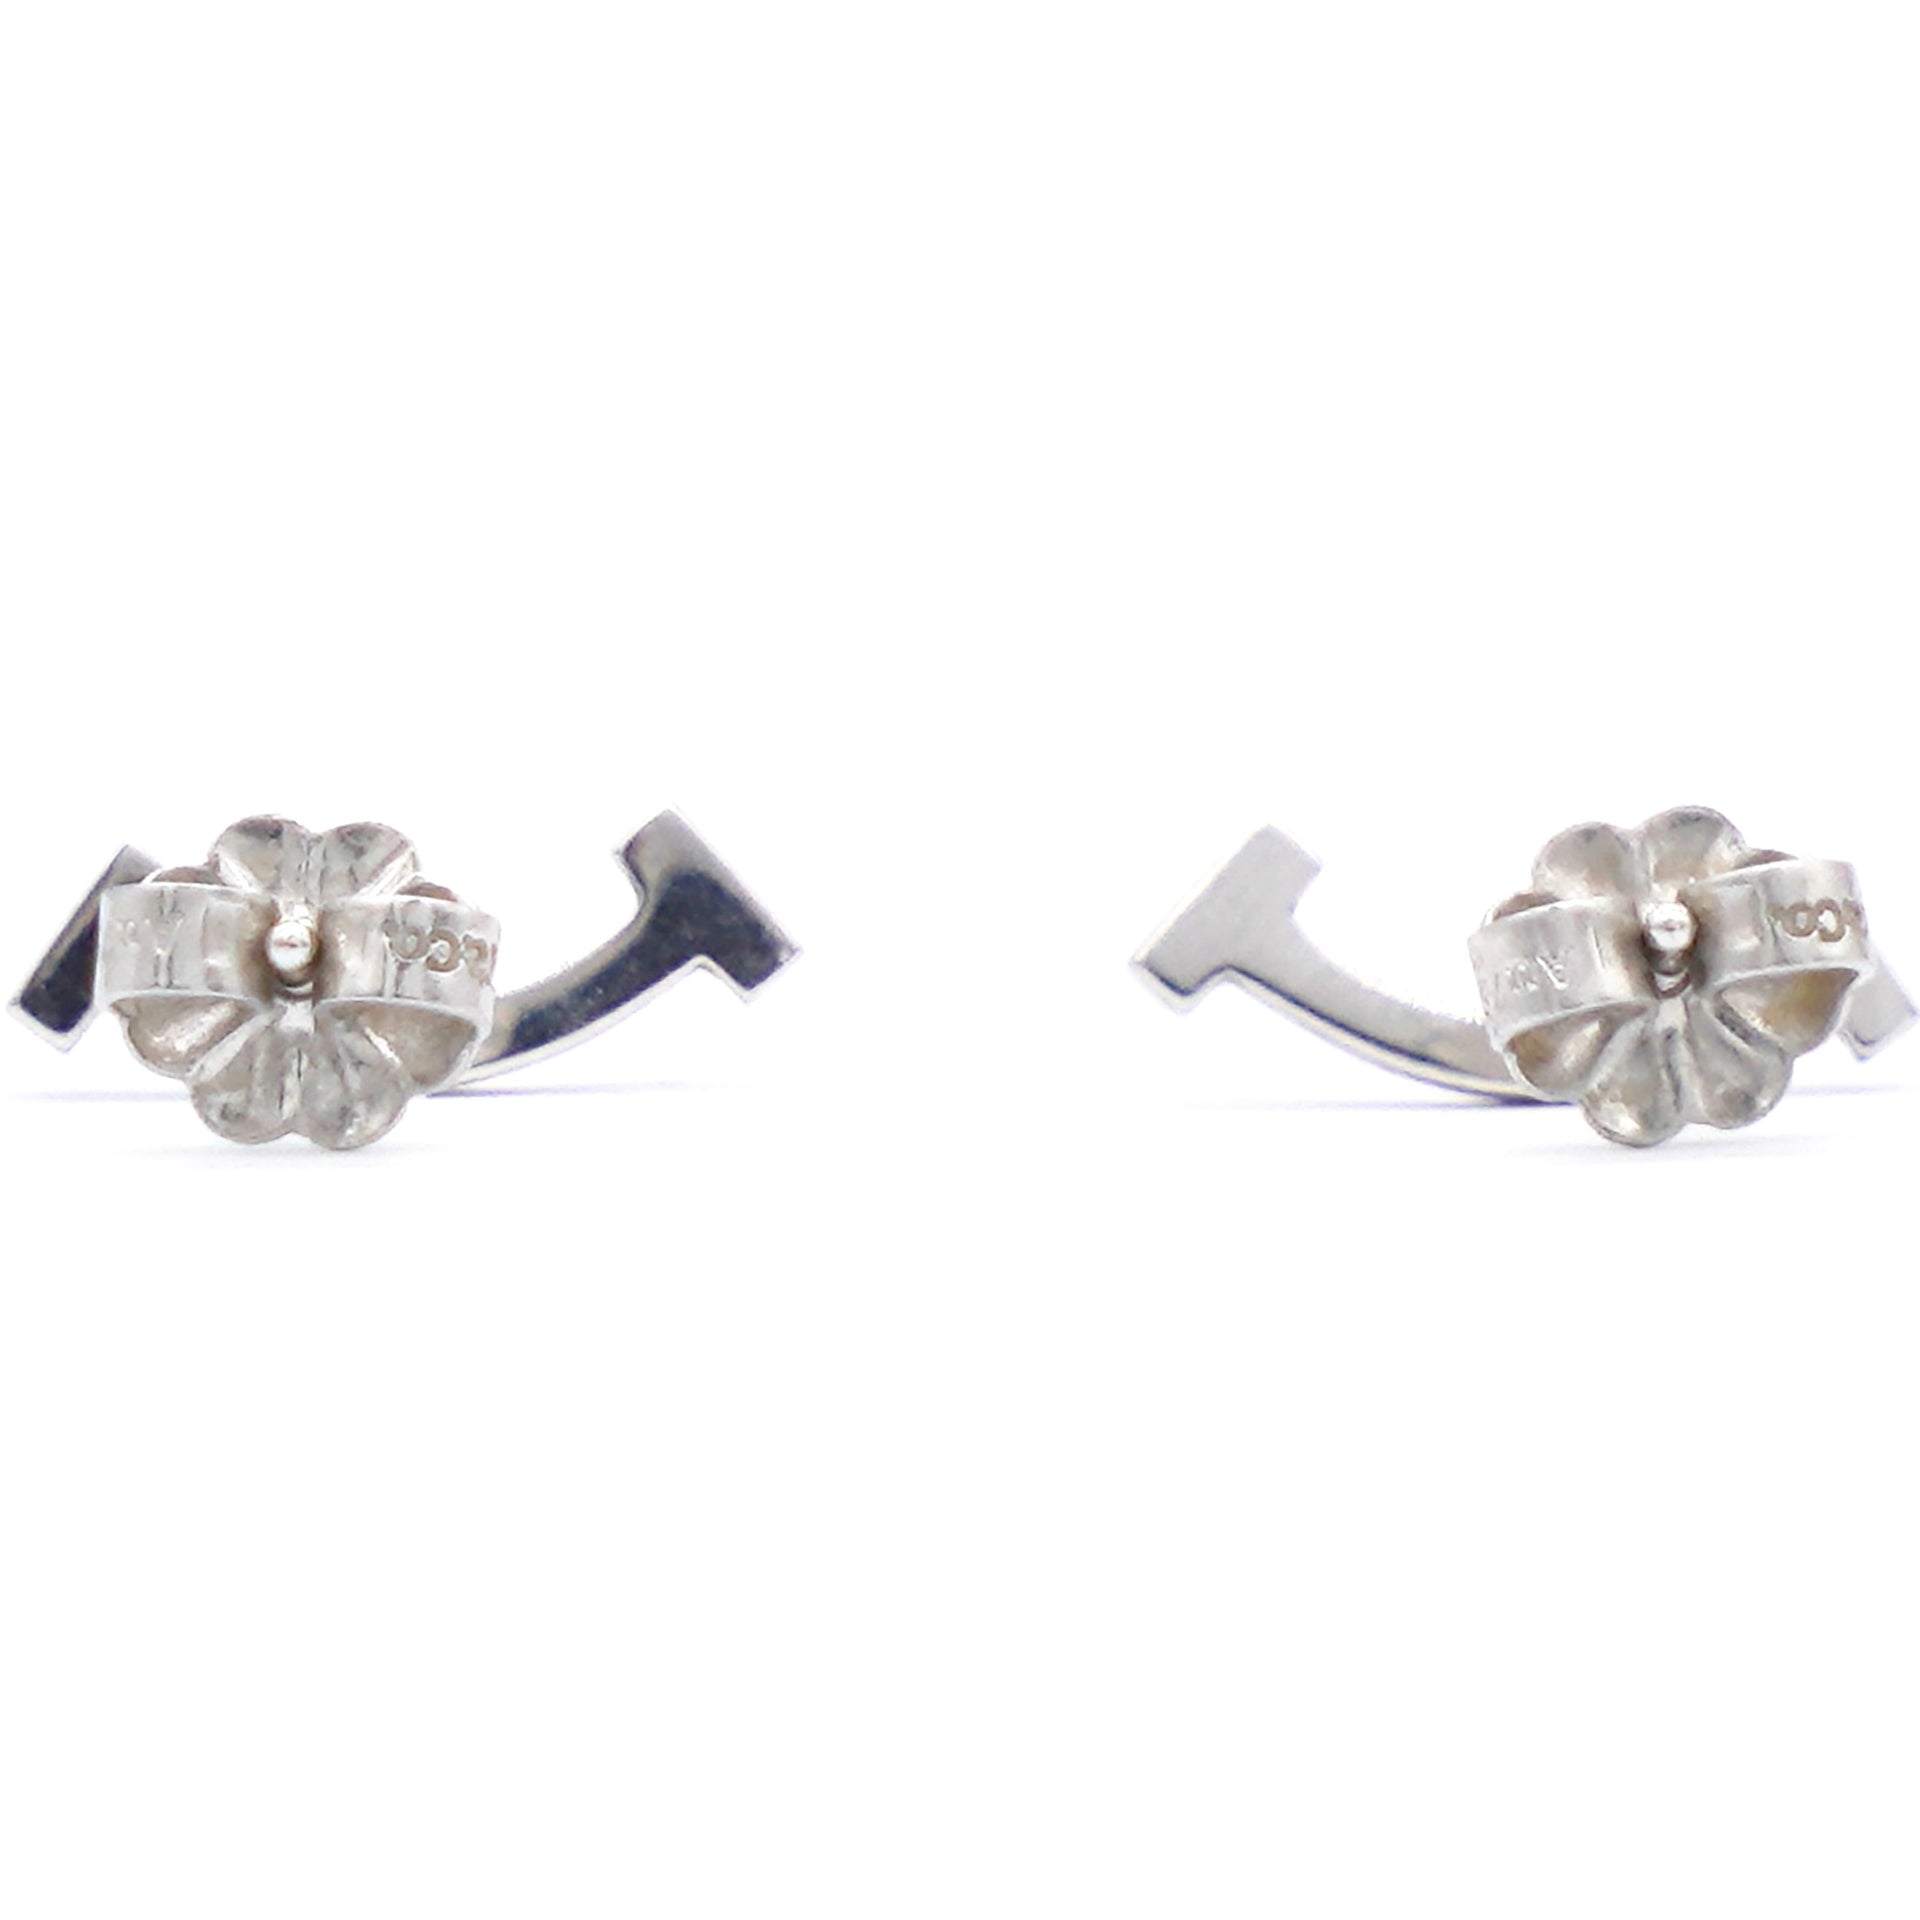 T Smile White Gold with Diamonds Earrings